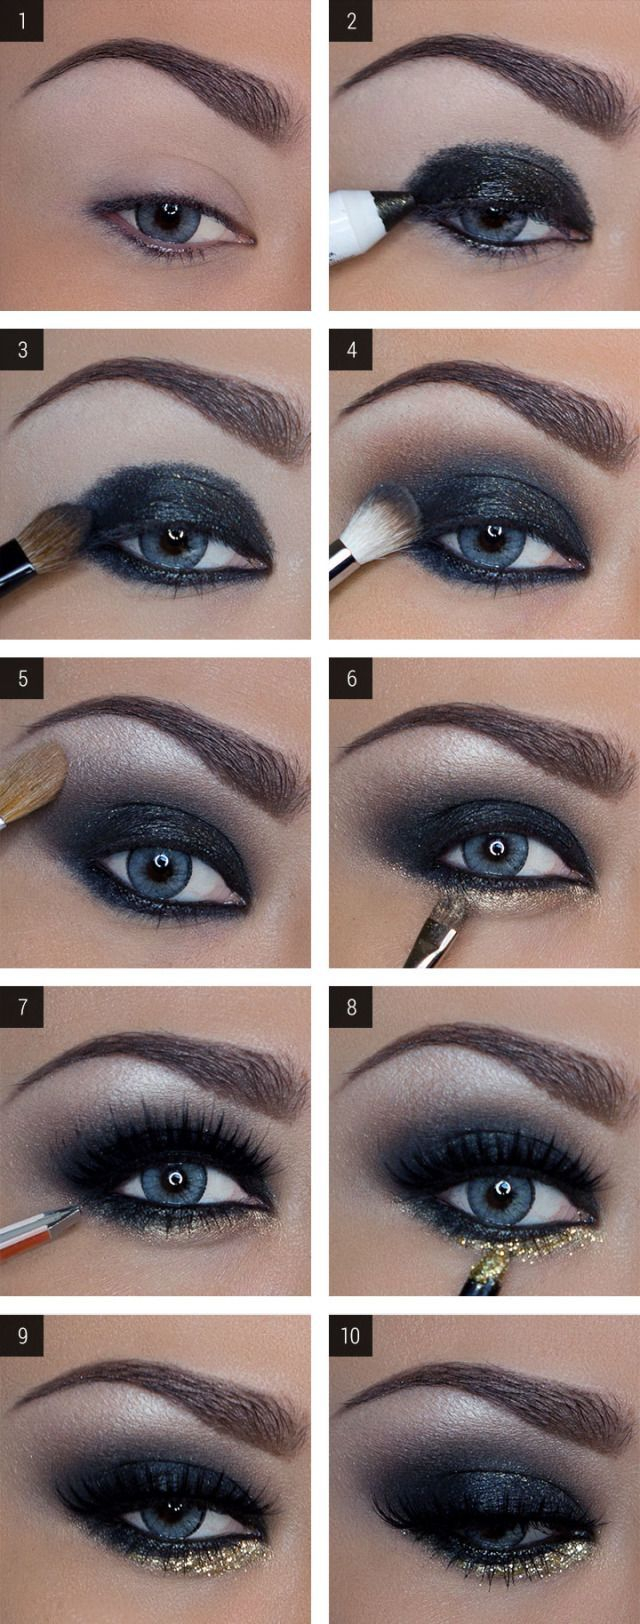 Eye Makeup For Dark Skin Simple Party Makeup Tips For Black Women To Look Gorgeous